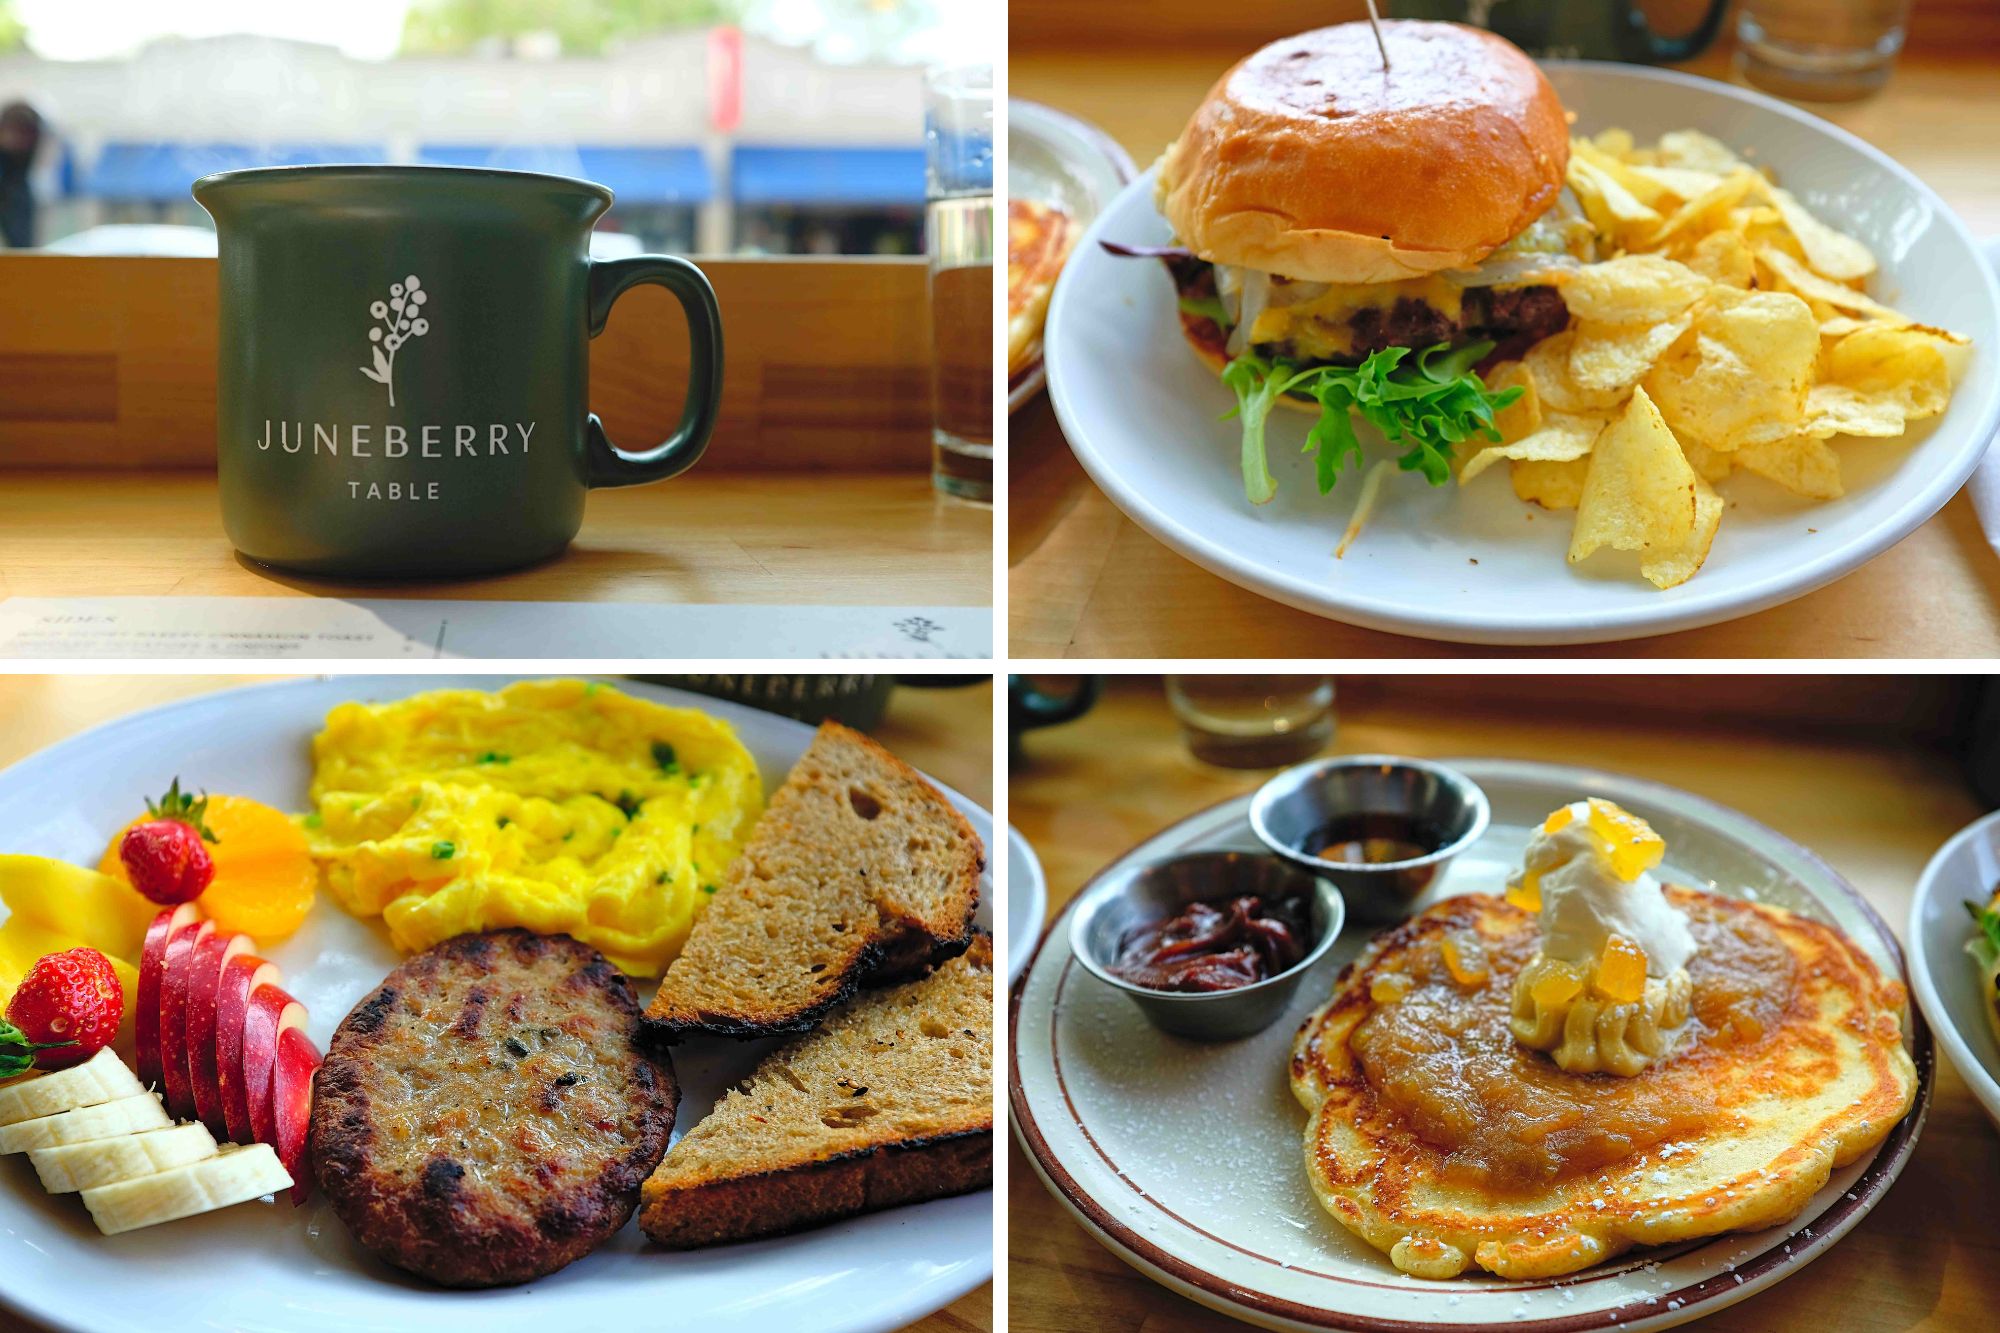 A collage of breakfast and brunch items at Juneberry Table